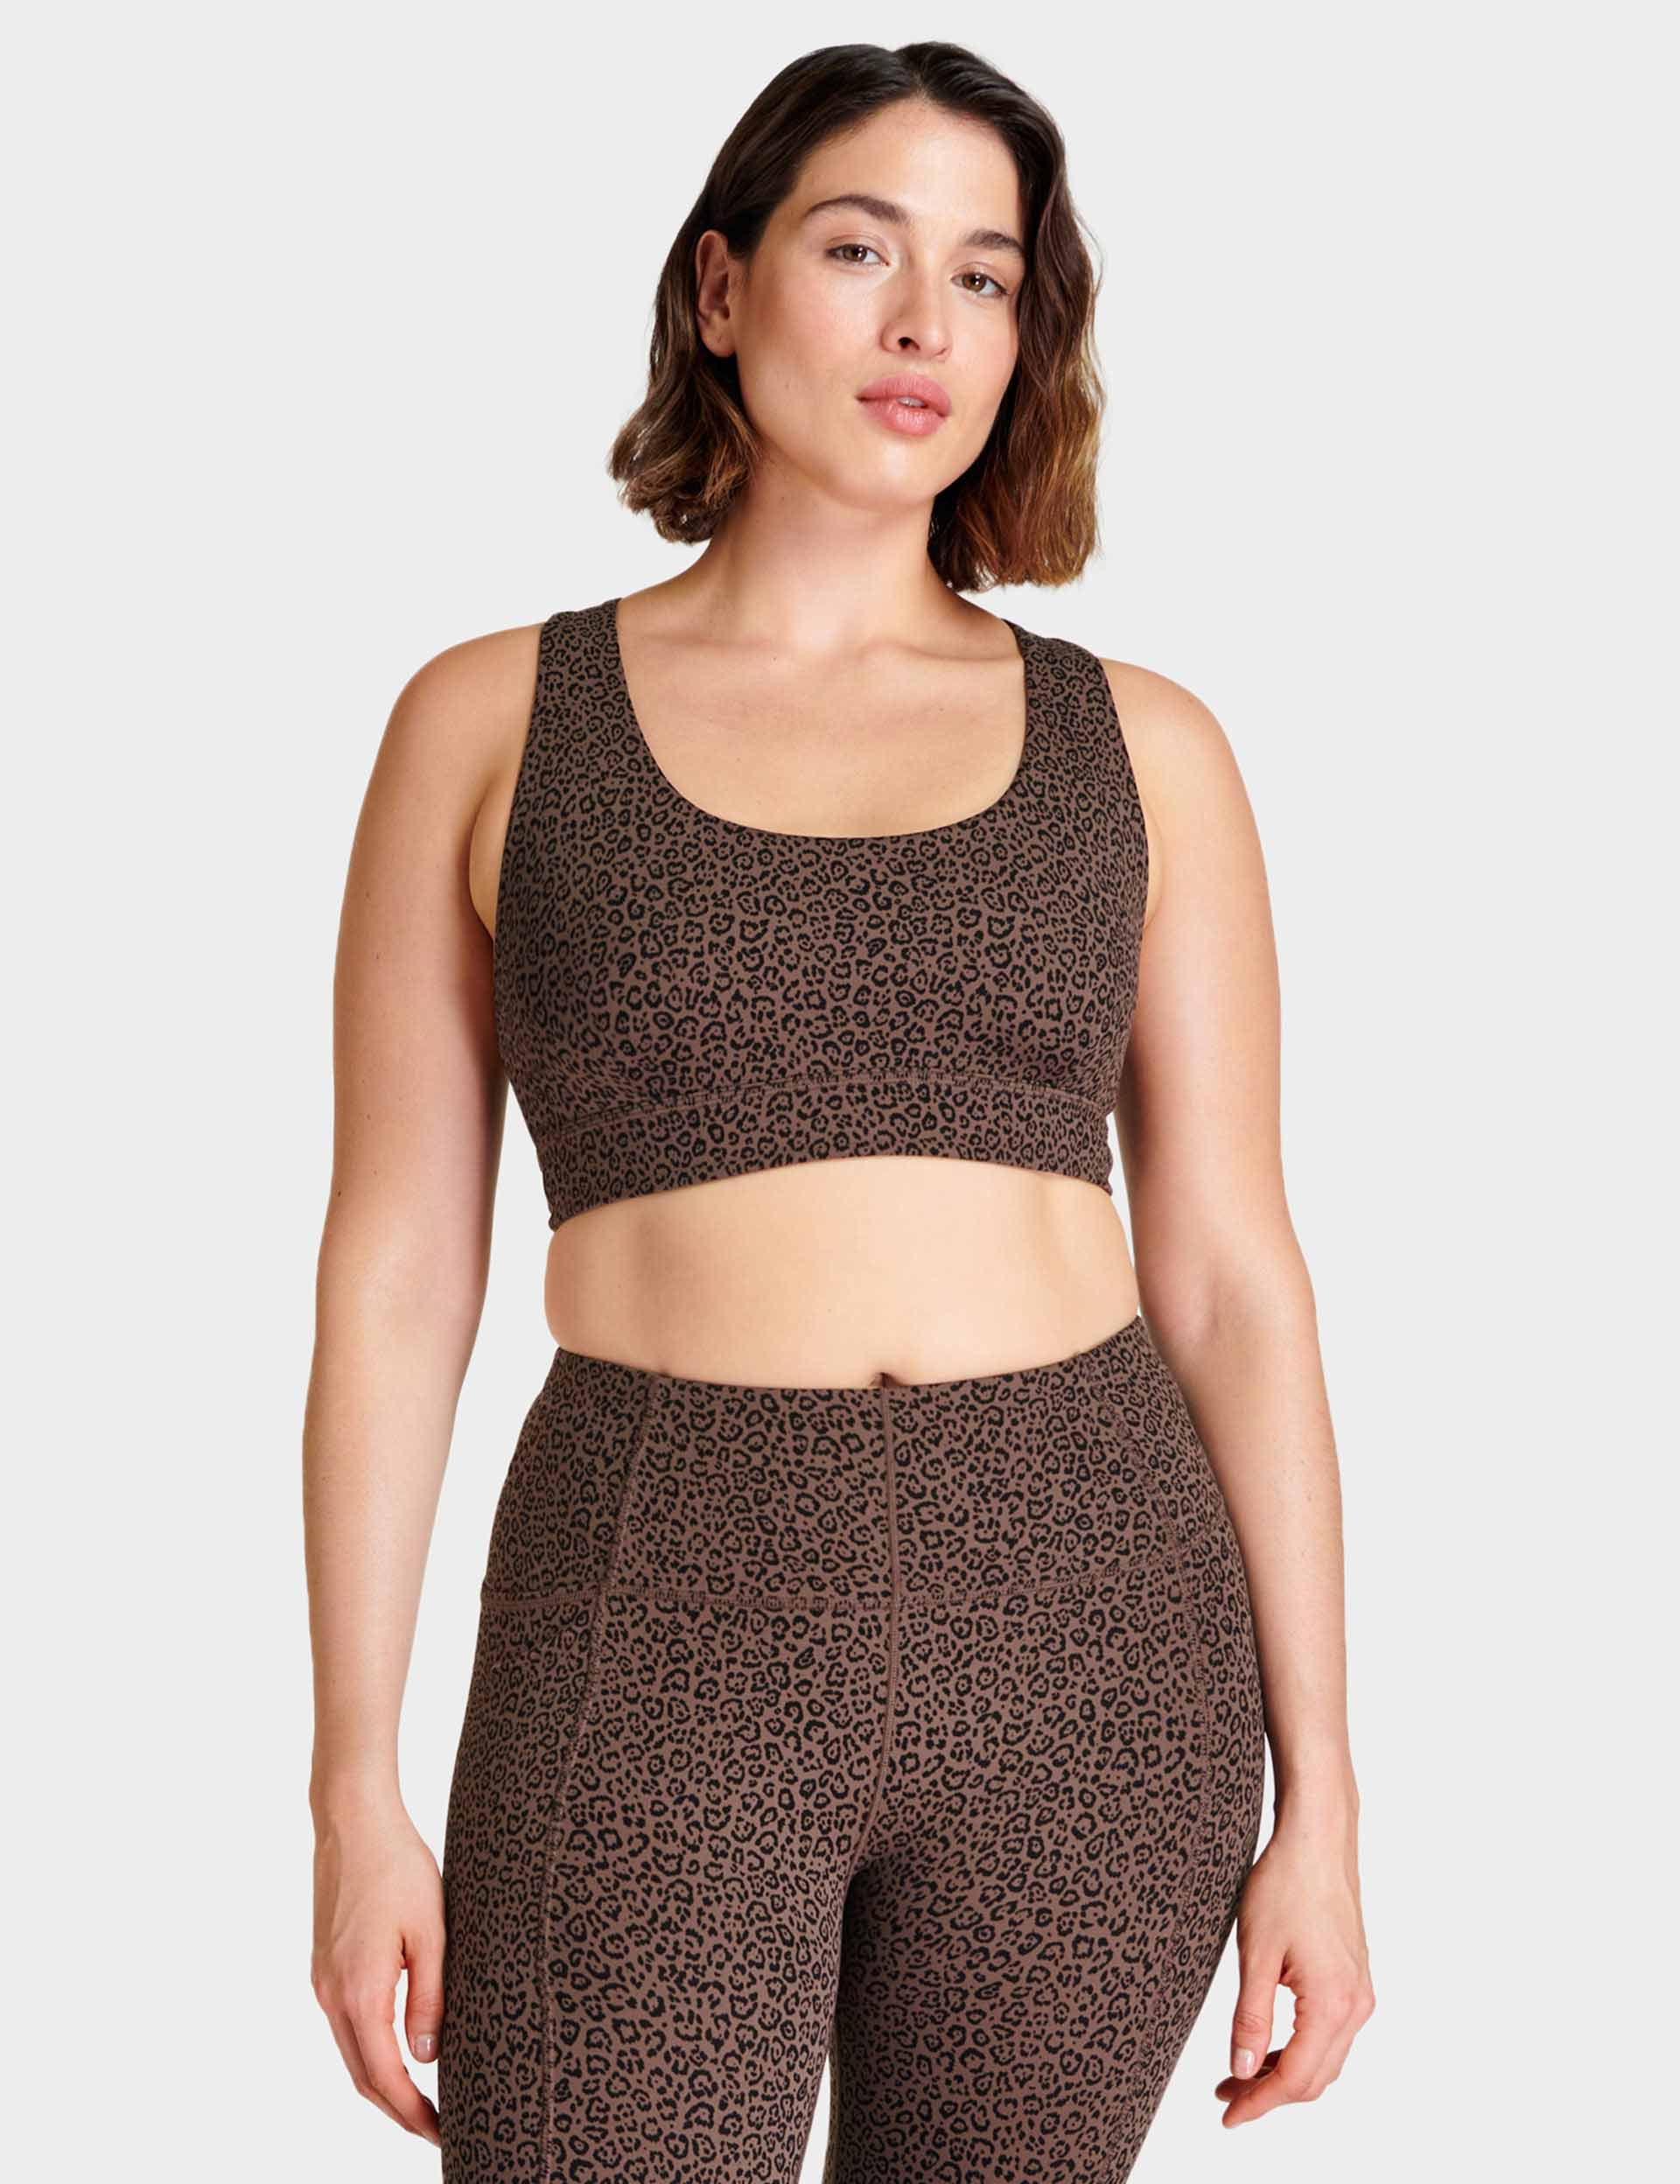 Sweaty Betty Grey Leopard Stamina Workout Yoga Exercise sports running bra  S new - $21 New With Tags - From Jenny